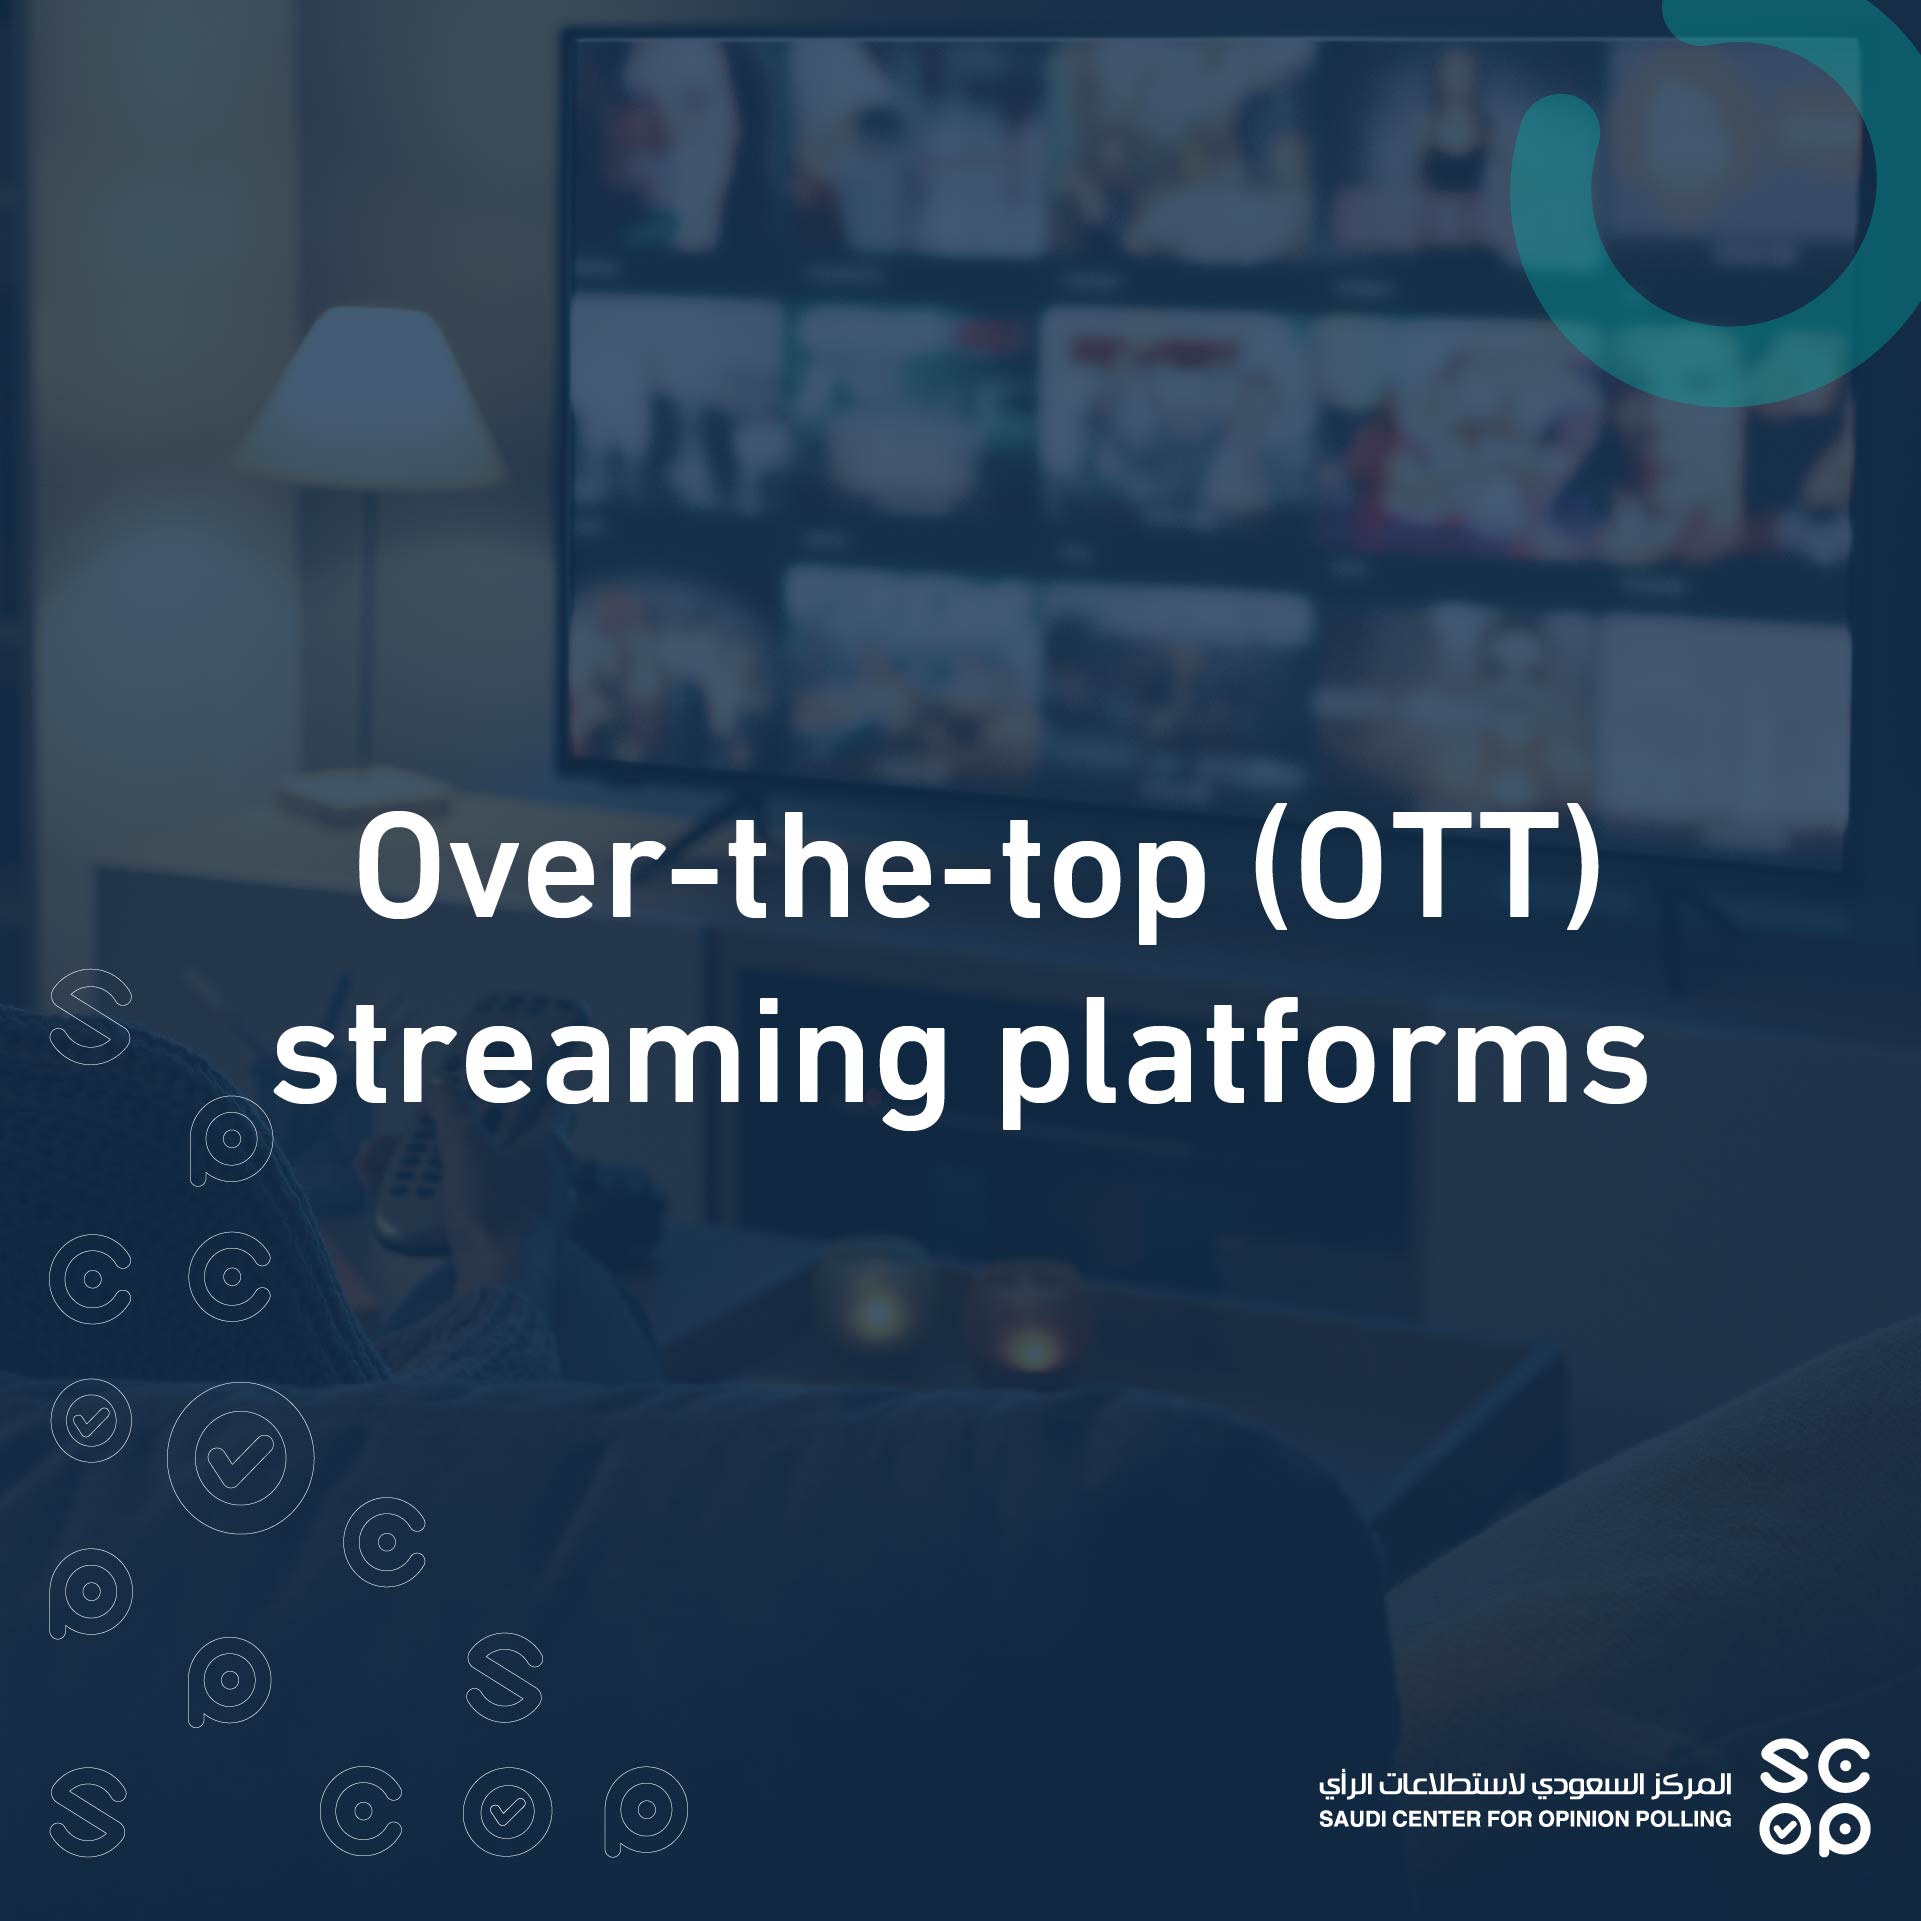 Current Poll: Over-the-top (OTT) streaming platforms